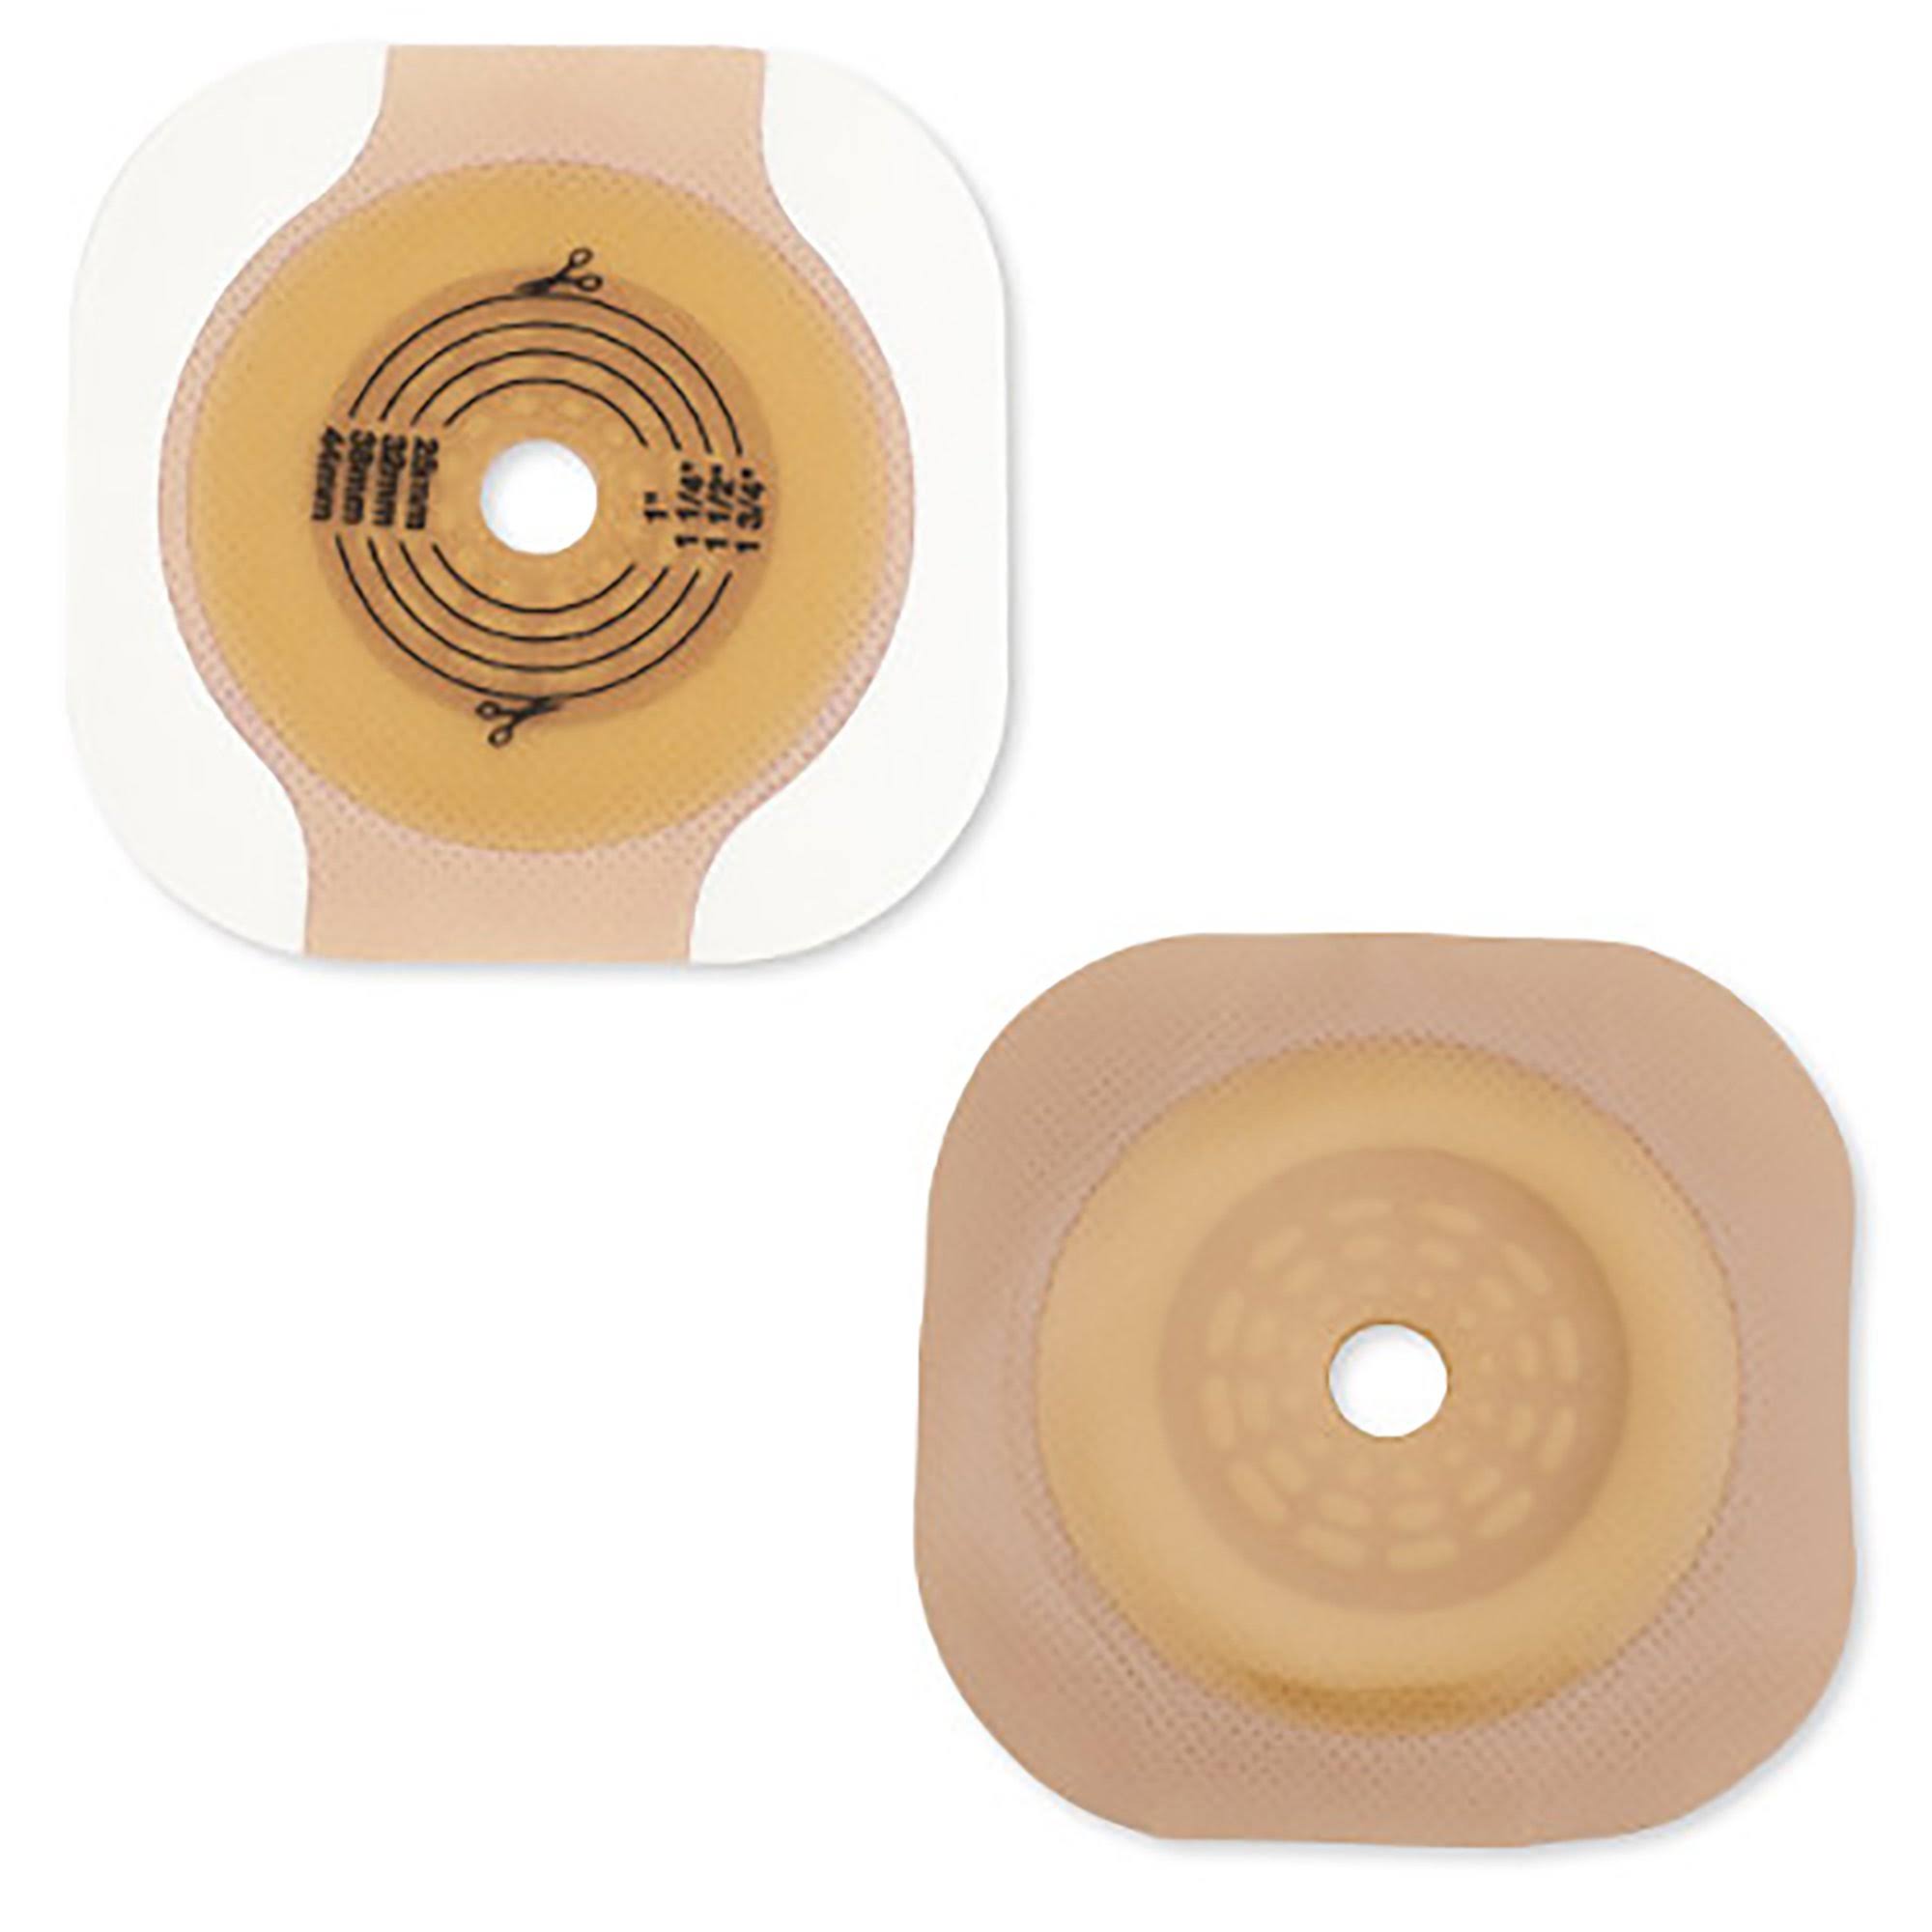 Skin Barrier Up To 2 1/4 Inch Stoma Opening; 5 Count